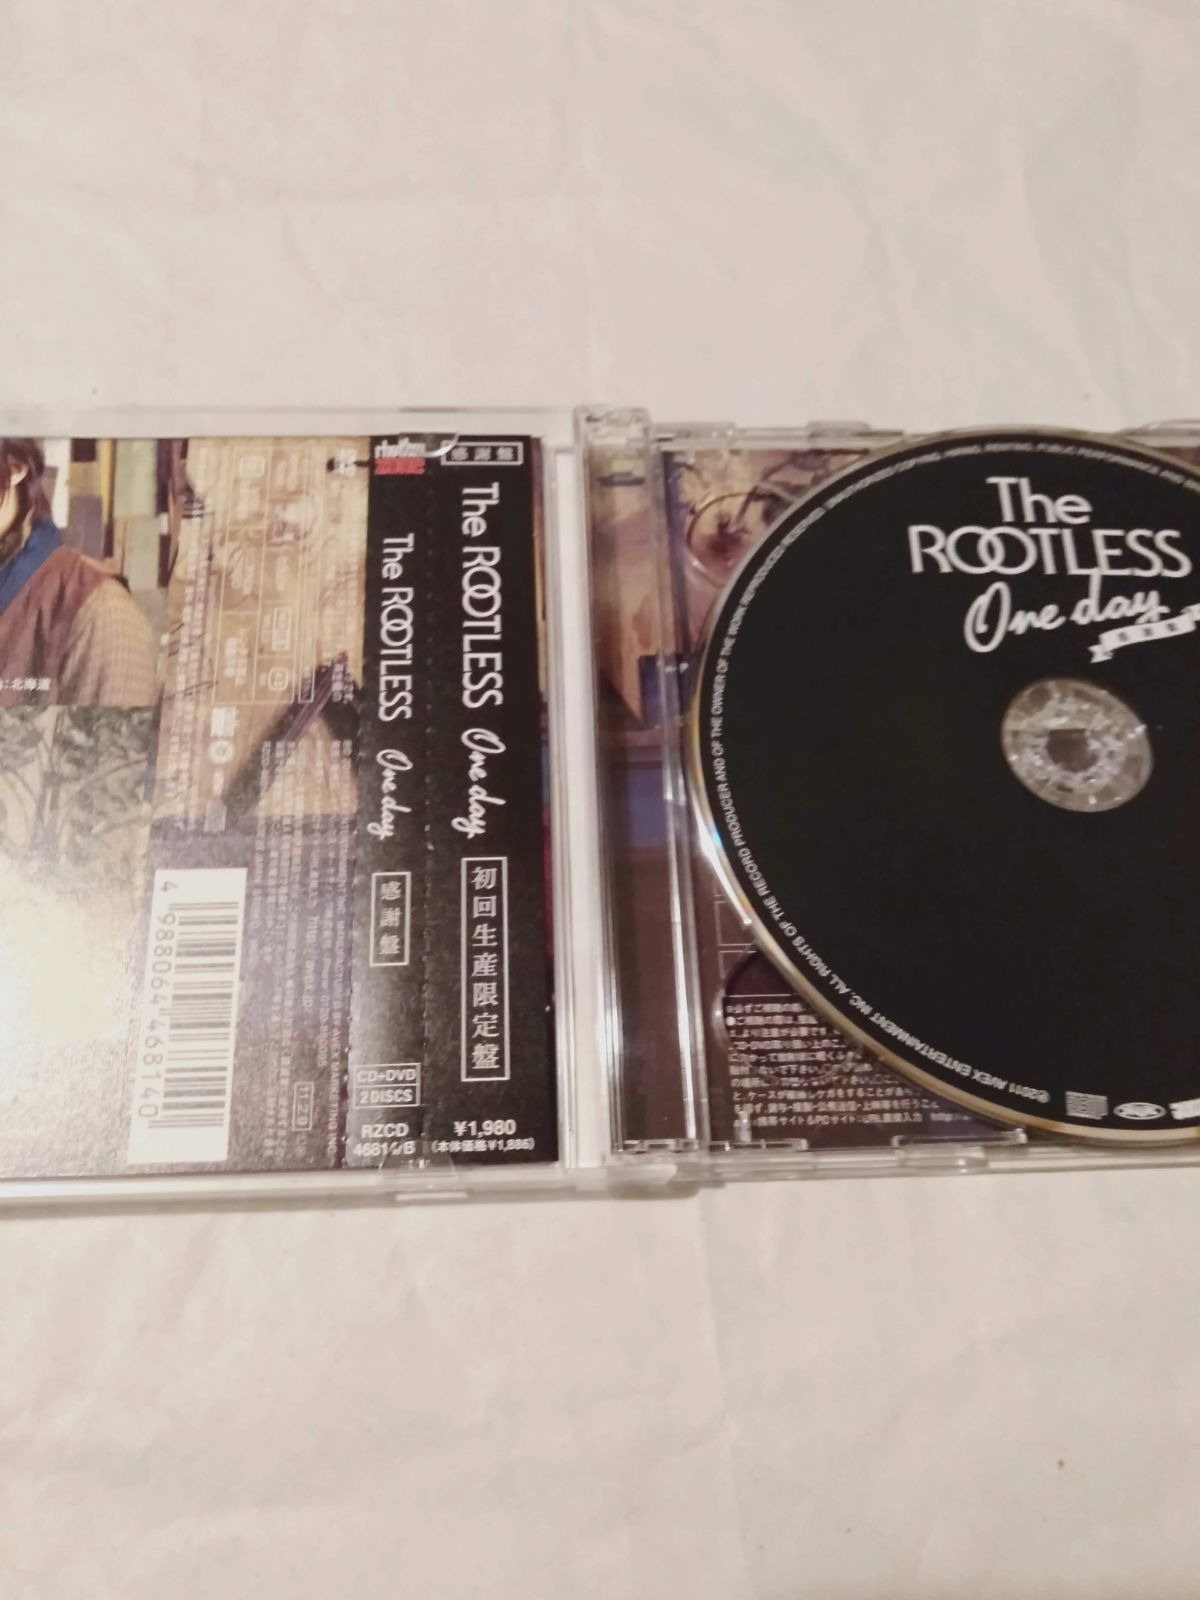 CD+DVD】The ROOTLESS/One day 感謝盤[ＤＶＤ付限定盤]　アニメ「ONE PIECE」主題歌